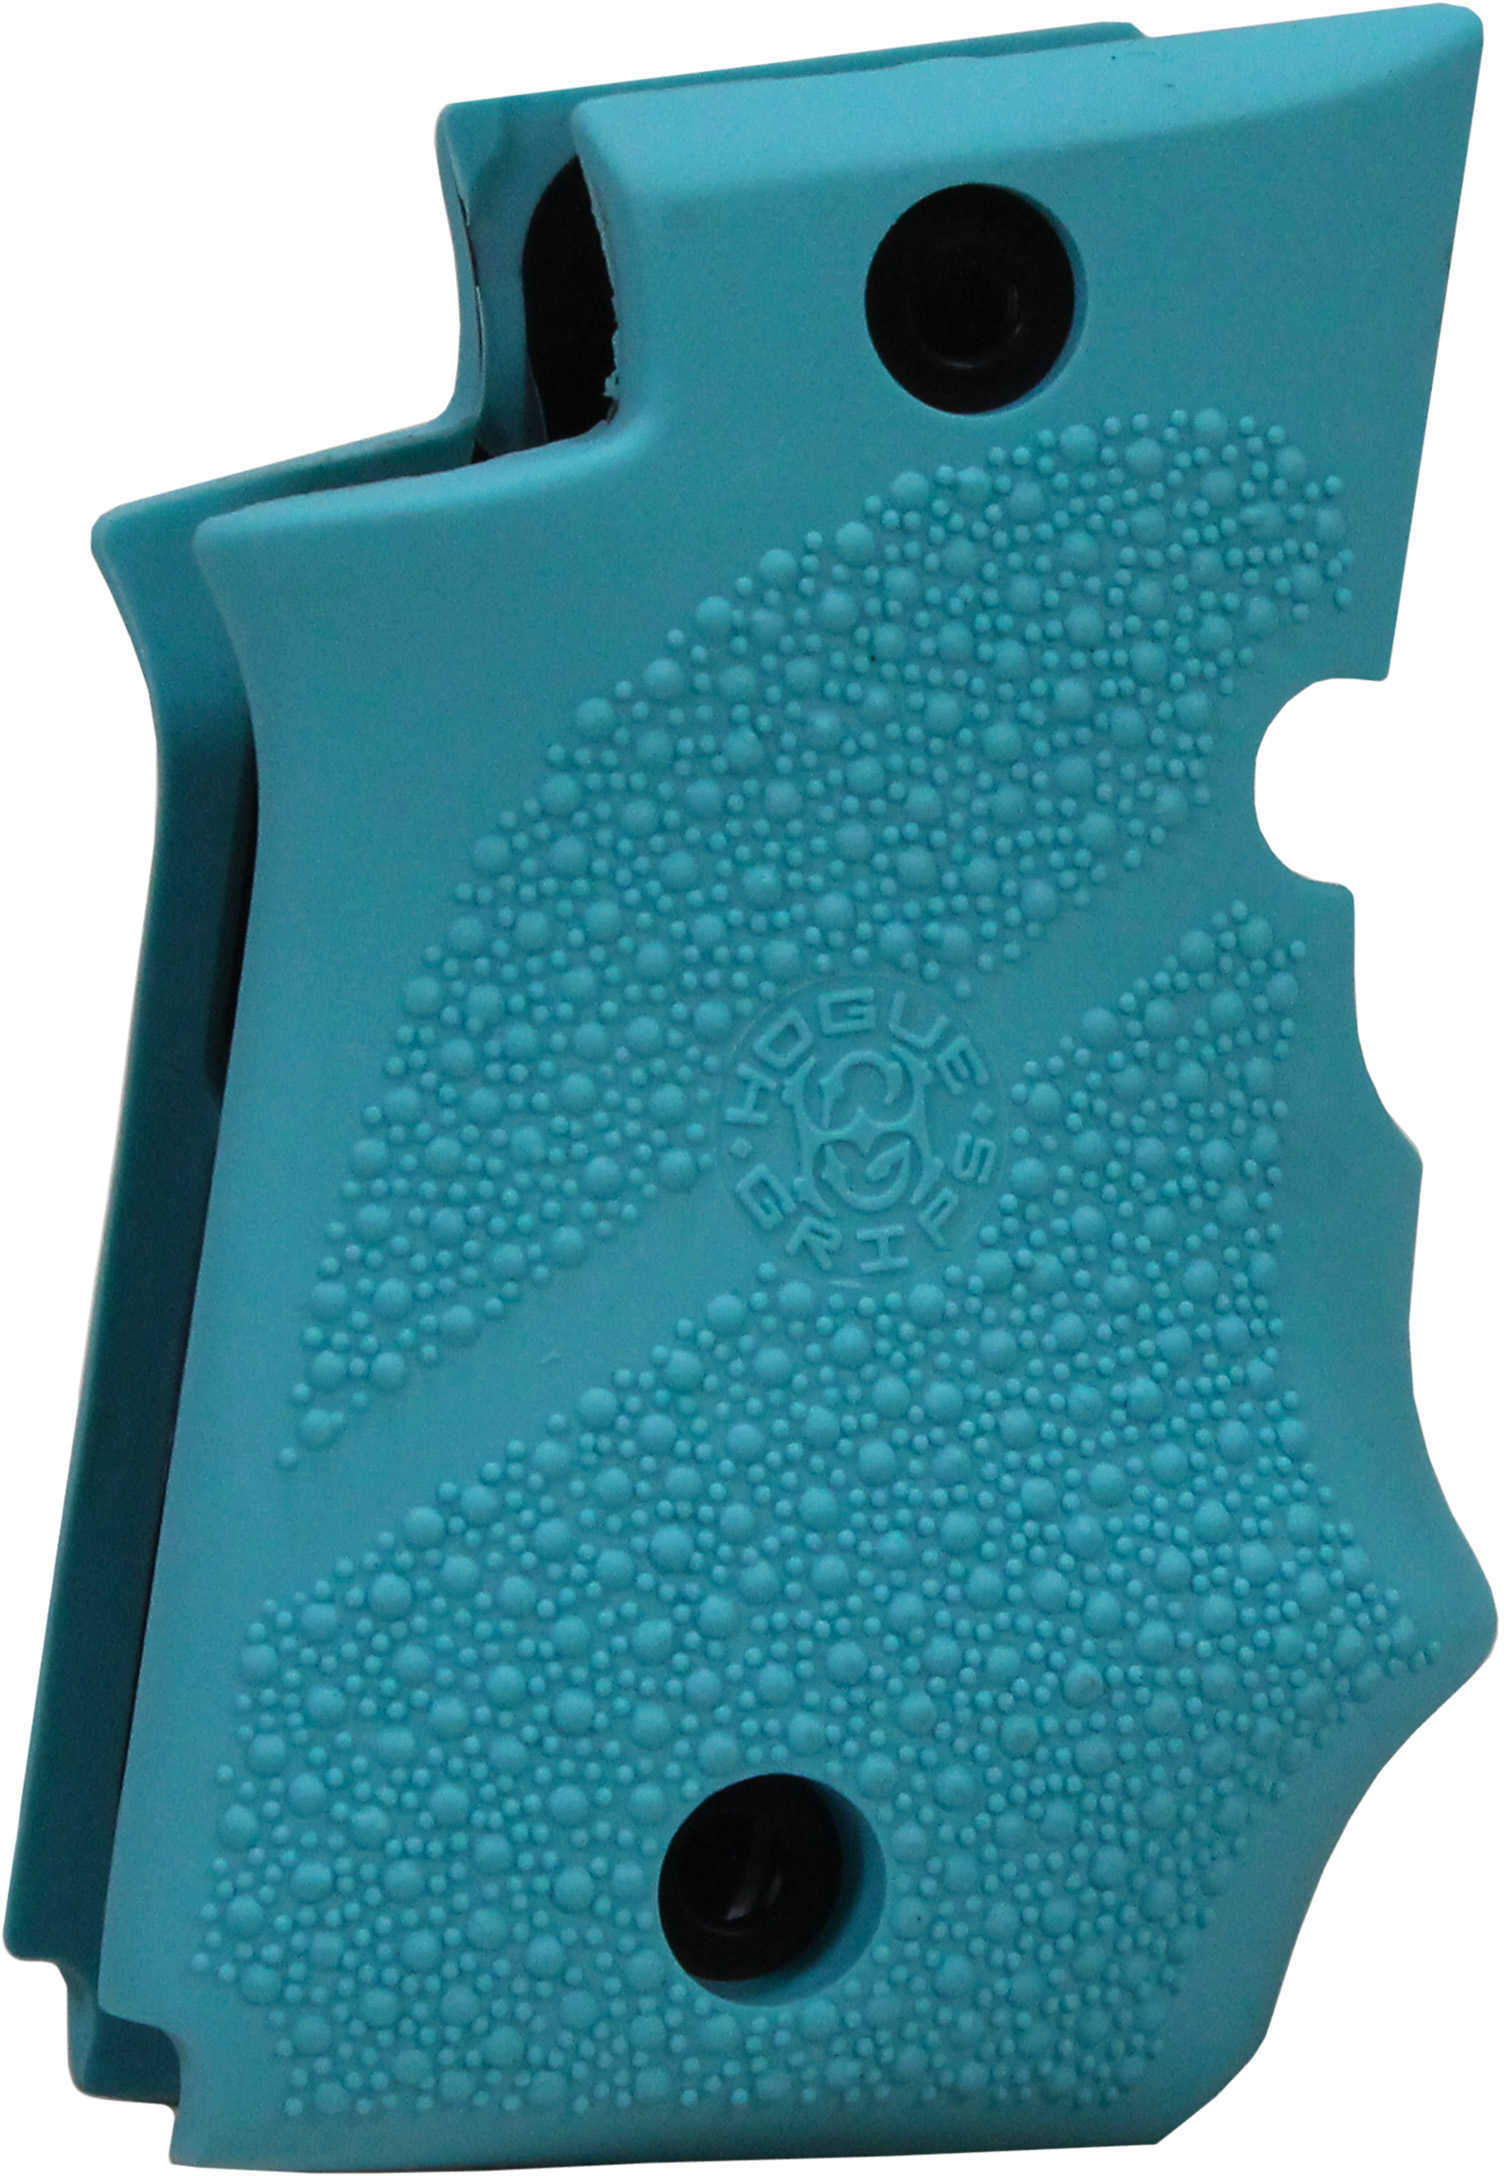 Hogue Sig P938 Rubber Grip Ambidextrous, with Finger Grooves, Aqua Md: 98084